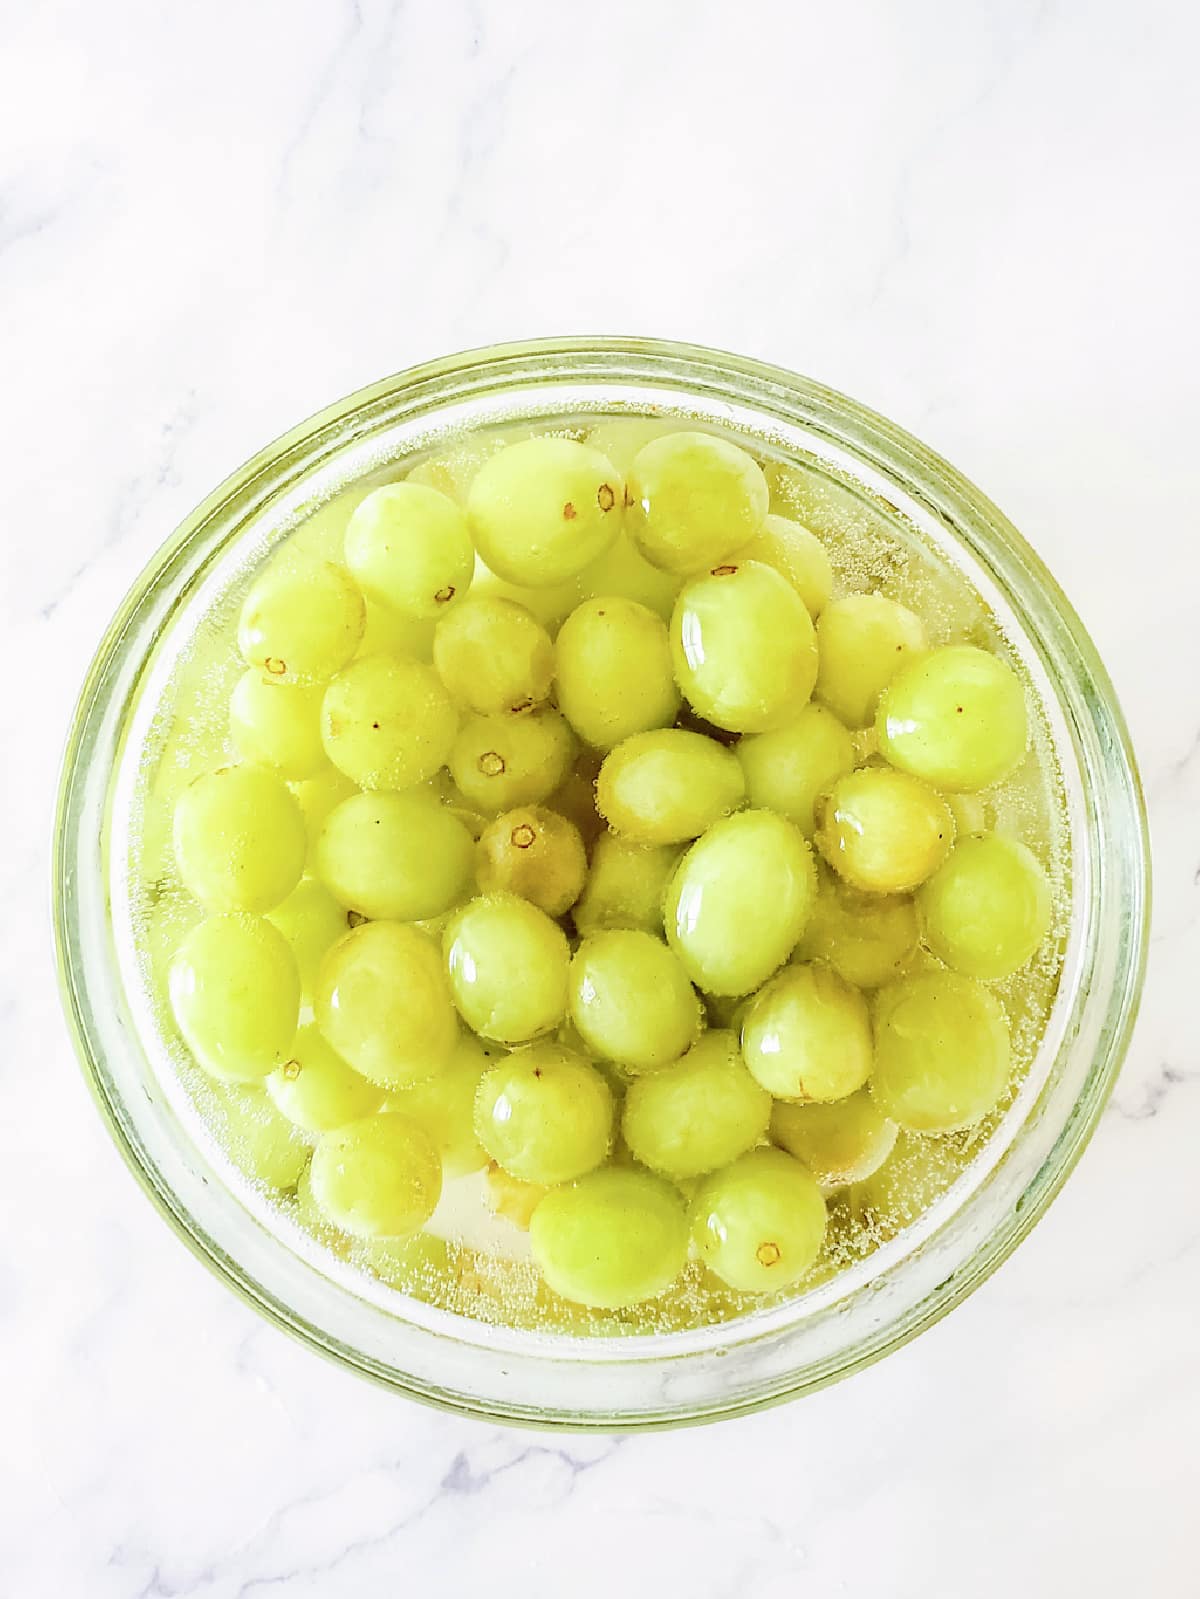 soak grapes for 12 hours